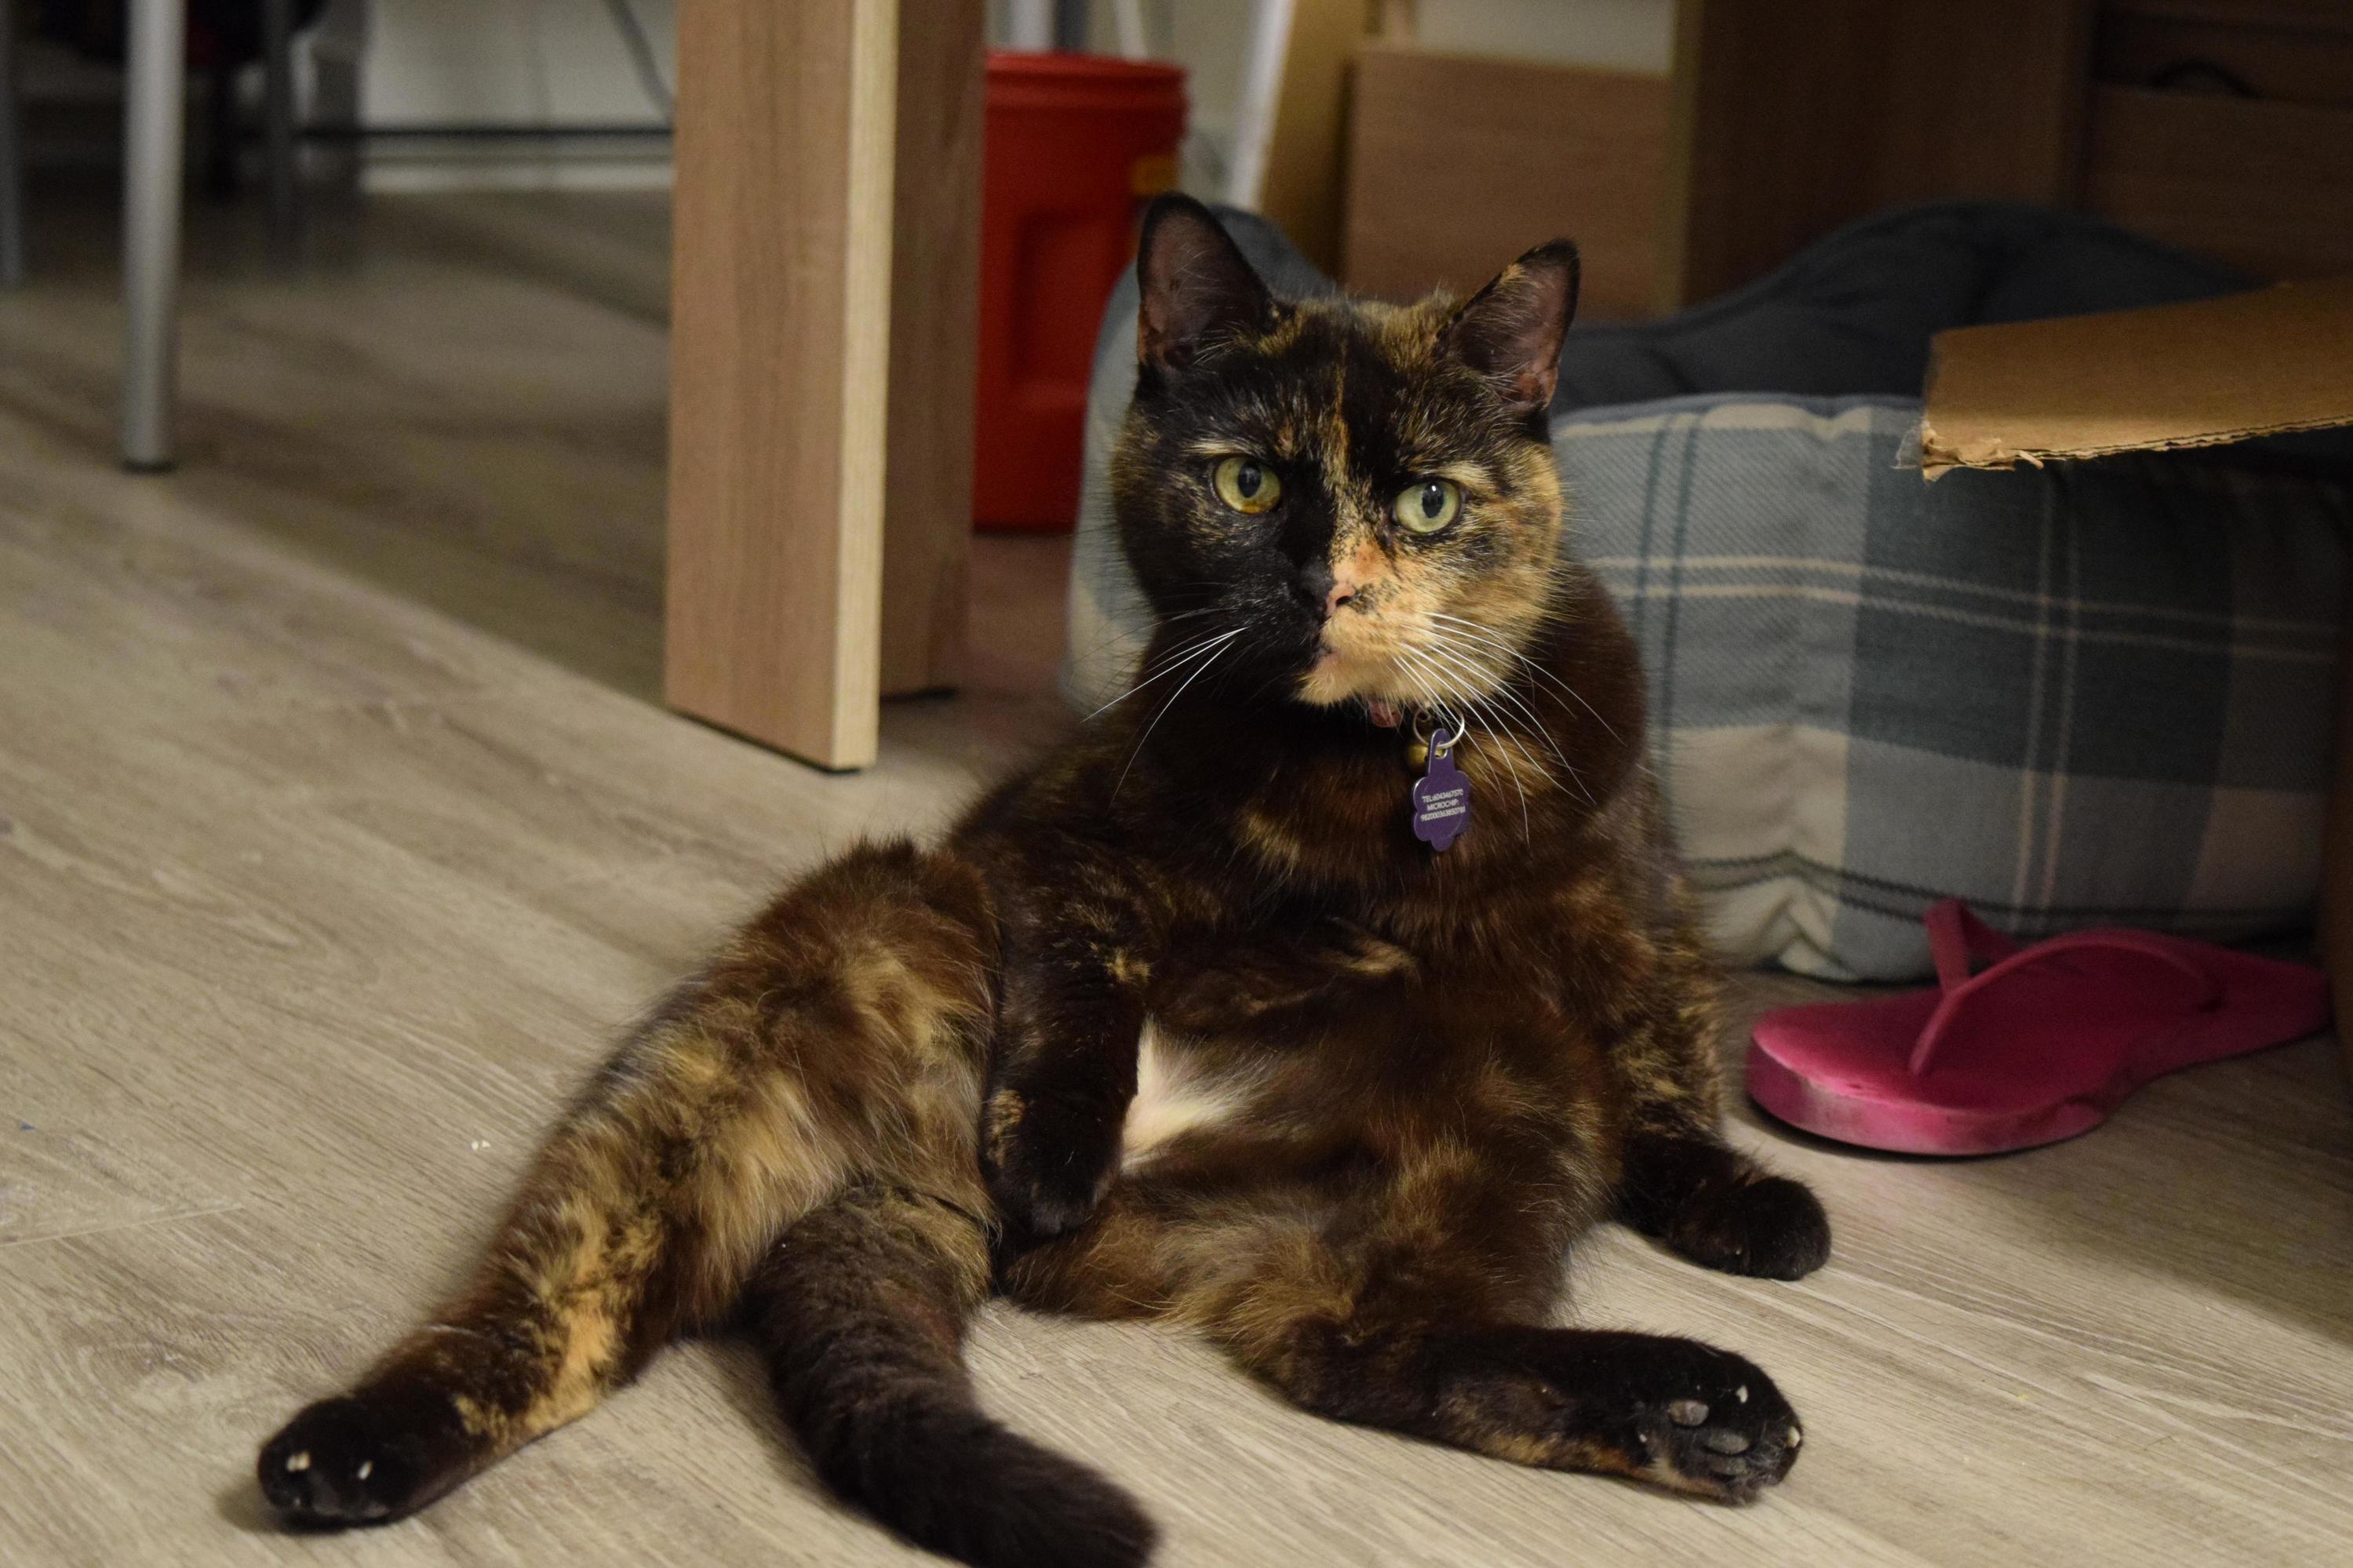 My two faced tortie sitting like a hooman.